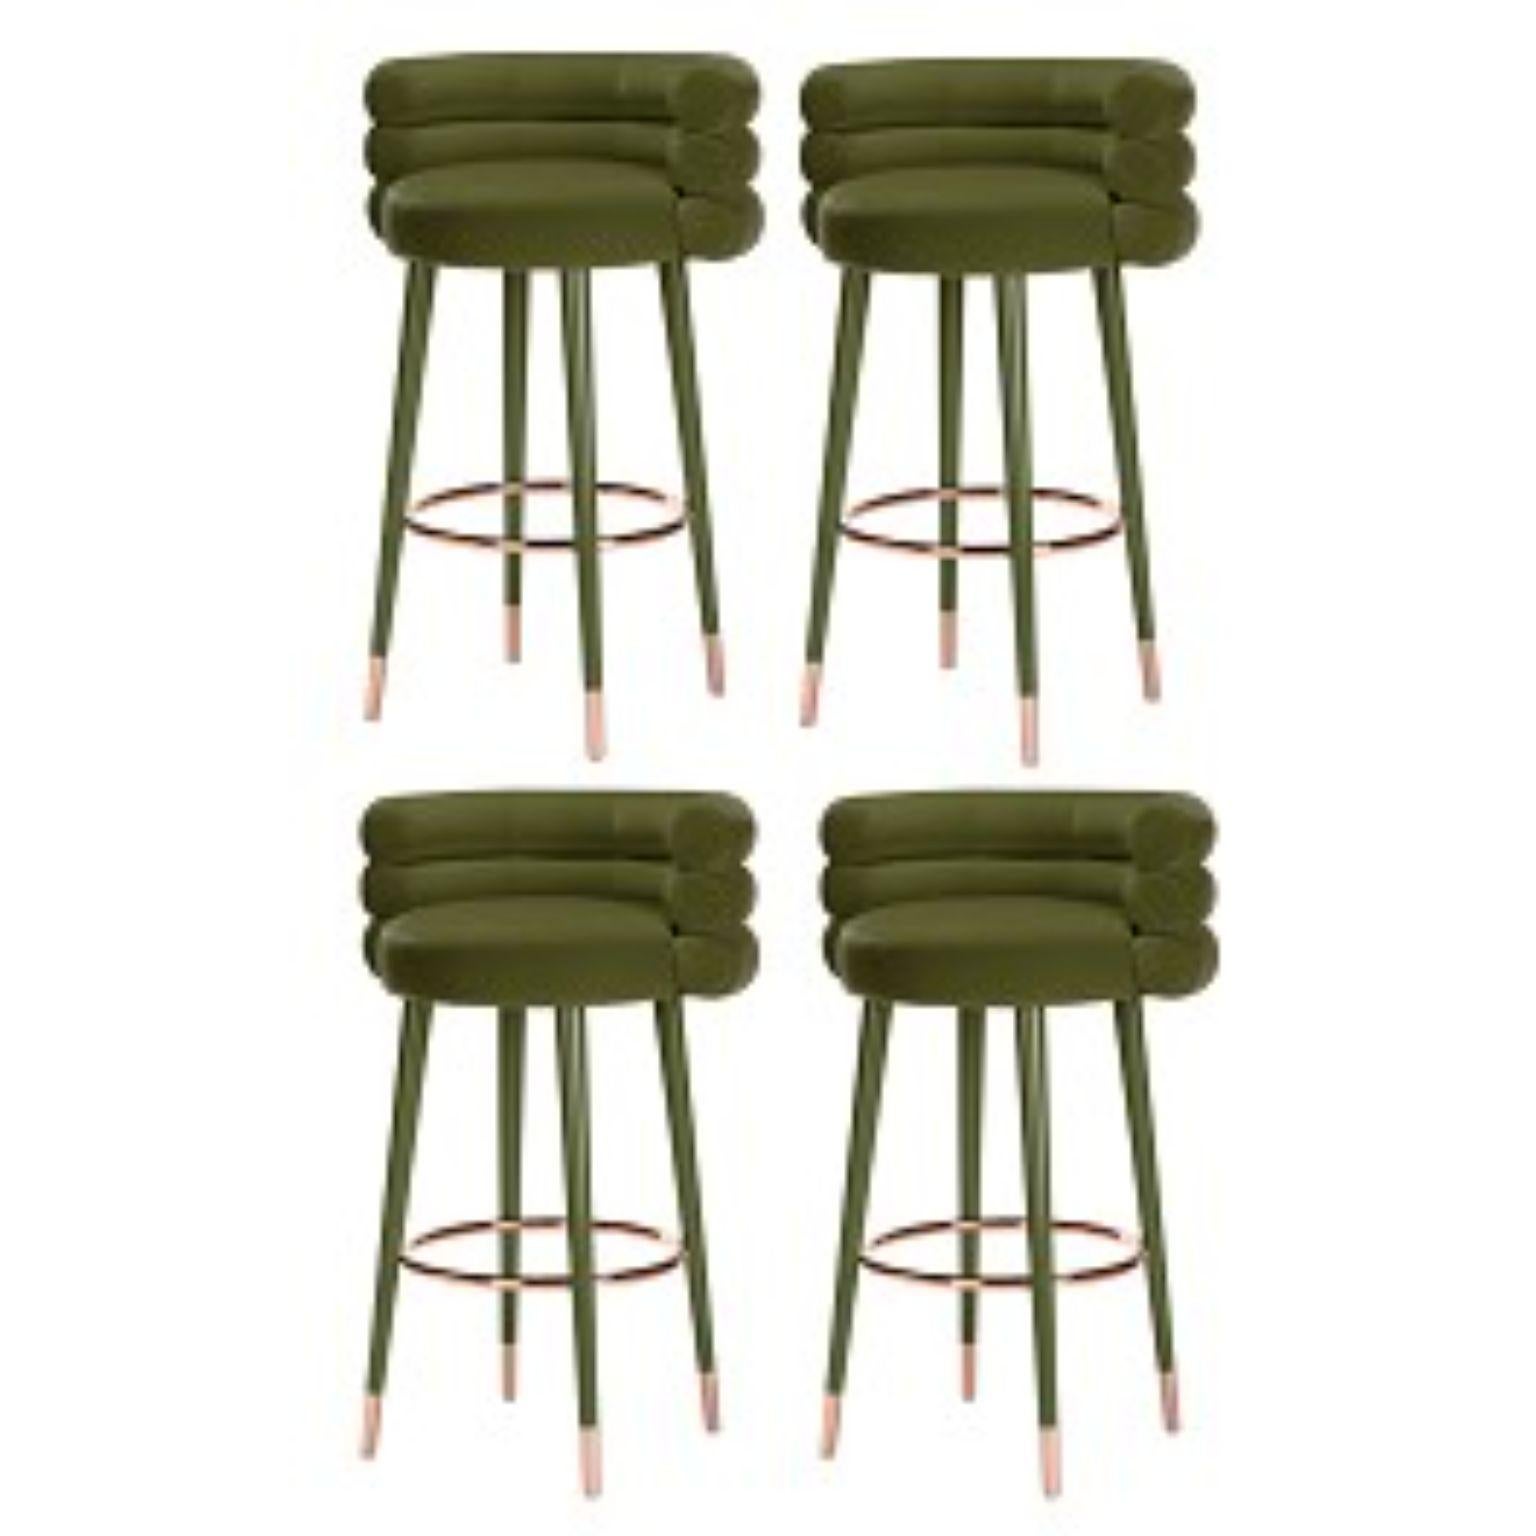 Set of 4 Marshmallow bar stools, Royal Stranger
Dimensions: 100 x 70 x 60 cm
Materials: Velvet upholstery, brass
Available in: Mint green, light pink, Royal green, Royal red

Royal stranger is an exclusive furniture brand determined to bring